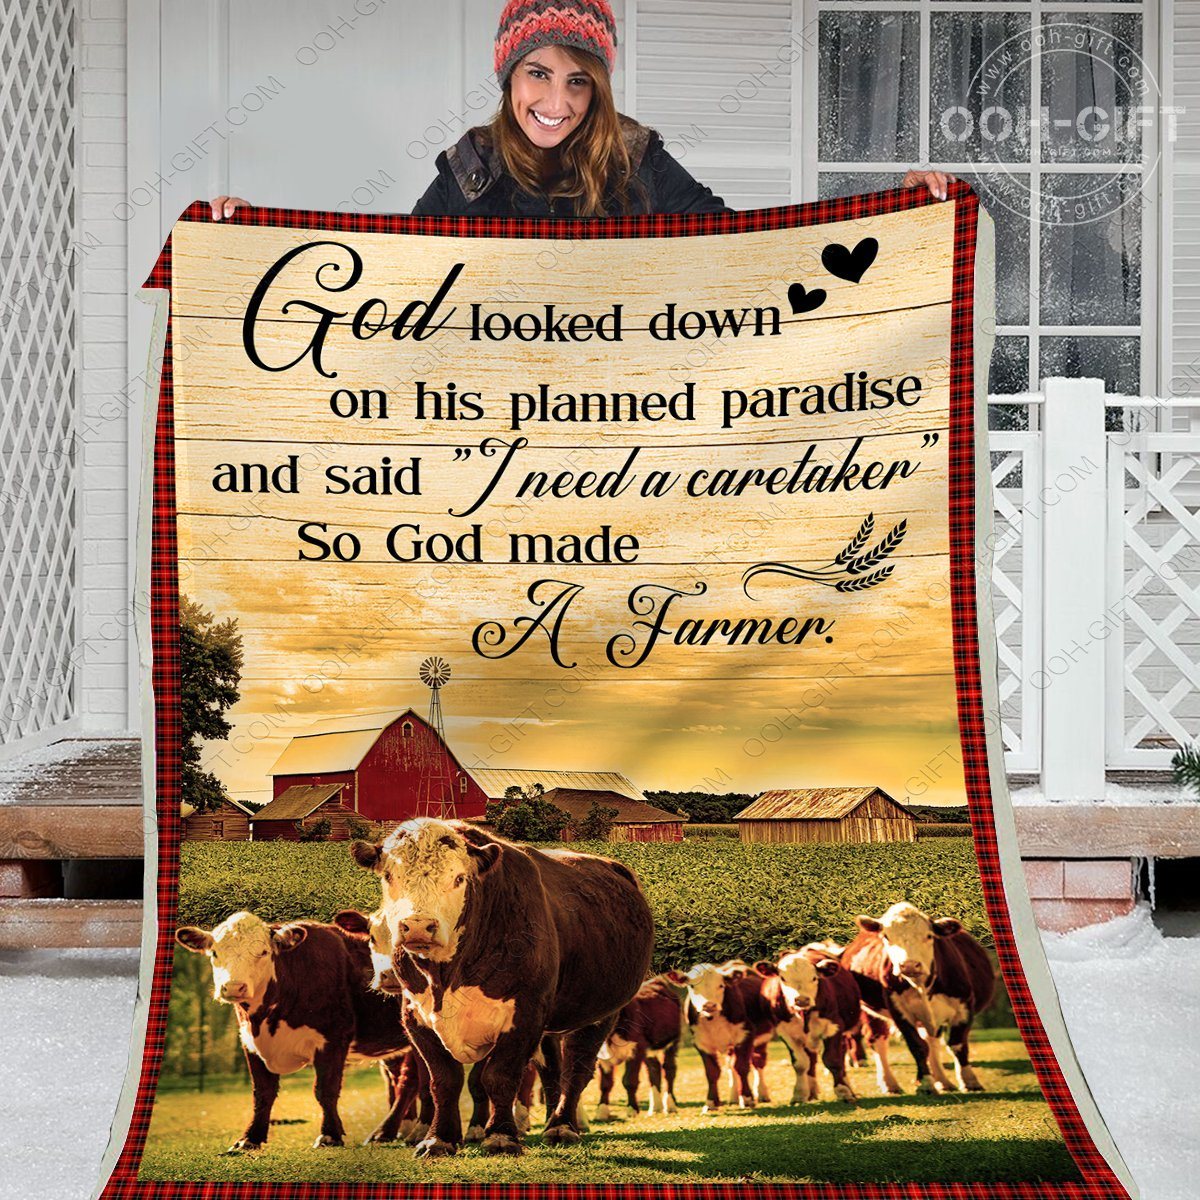 Good Looked Down On His Planned Paradise and Said I Need A Caretaker So God Made A Farmer Quilt Blanket – Saleoffshirt 1112194